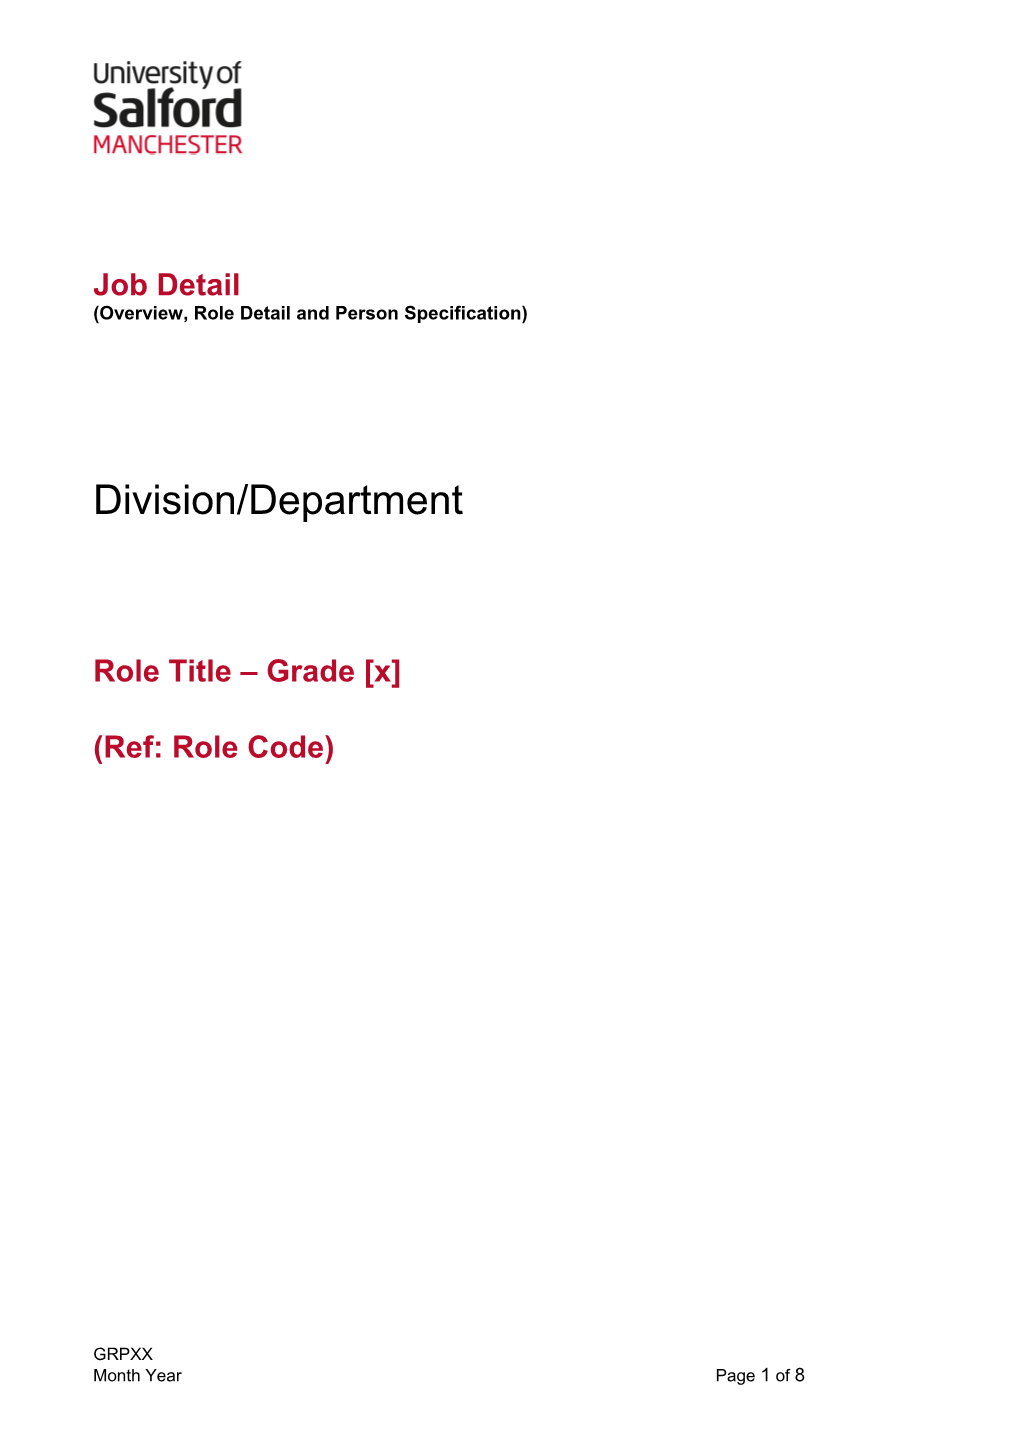 Overview, Role Detail and Person Specification s1